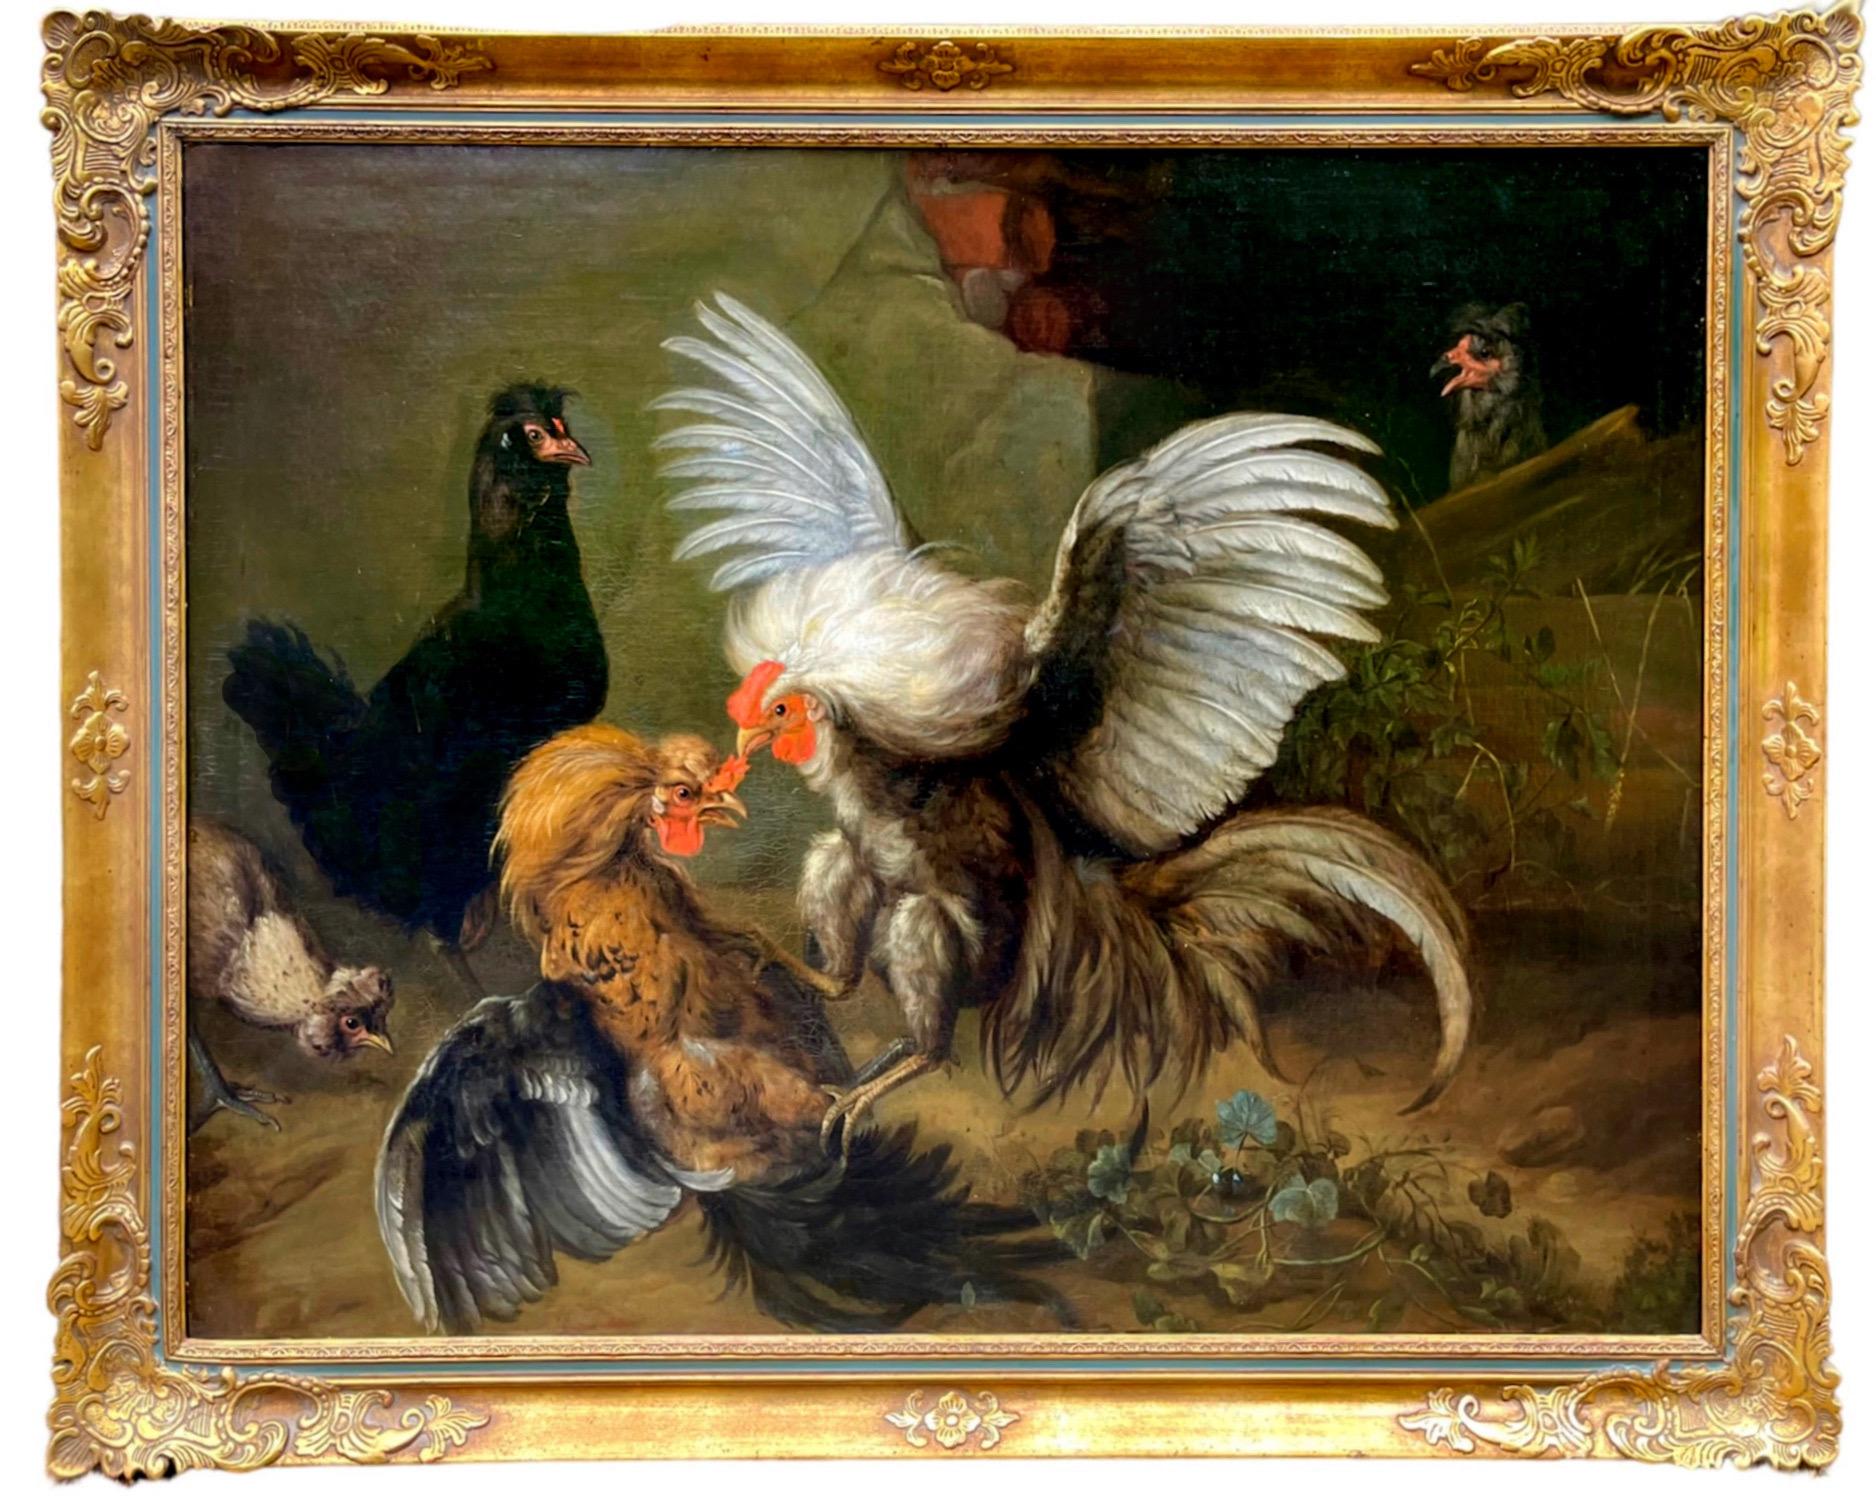 Giorgio Duranti Still-Life Painting - Huge 18th century Italian Old Master painting - Roosters fighting - Bird Cock